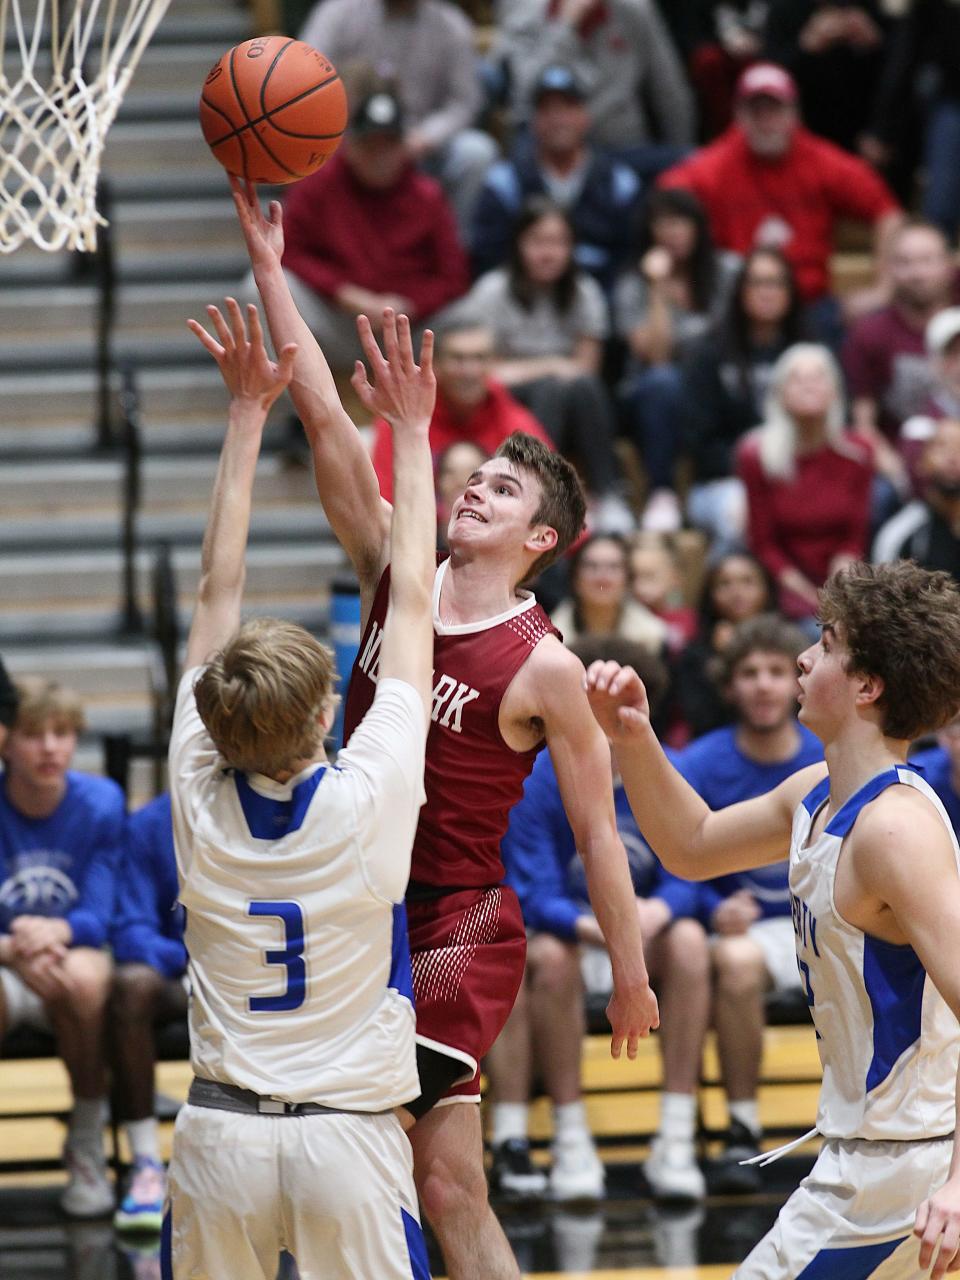 Newark senior Grant Burkholder is The Advocate Boys Basketball Player of the Year. He led the Wildcats to a Division I district championship.